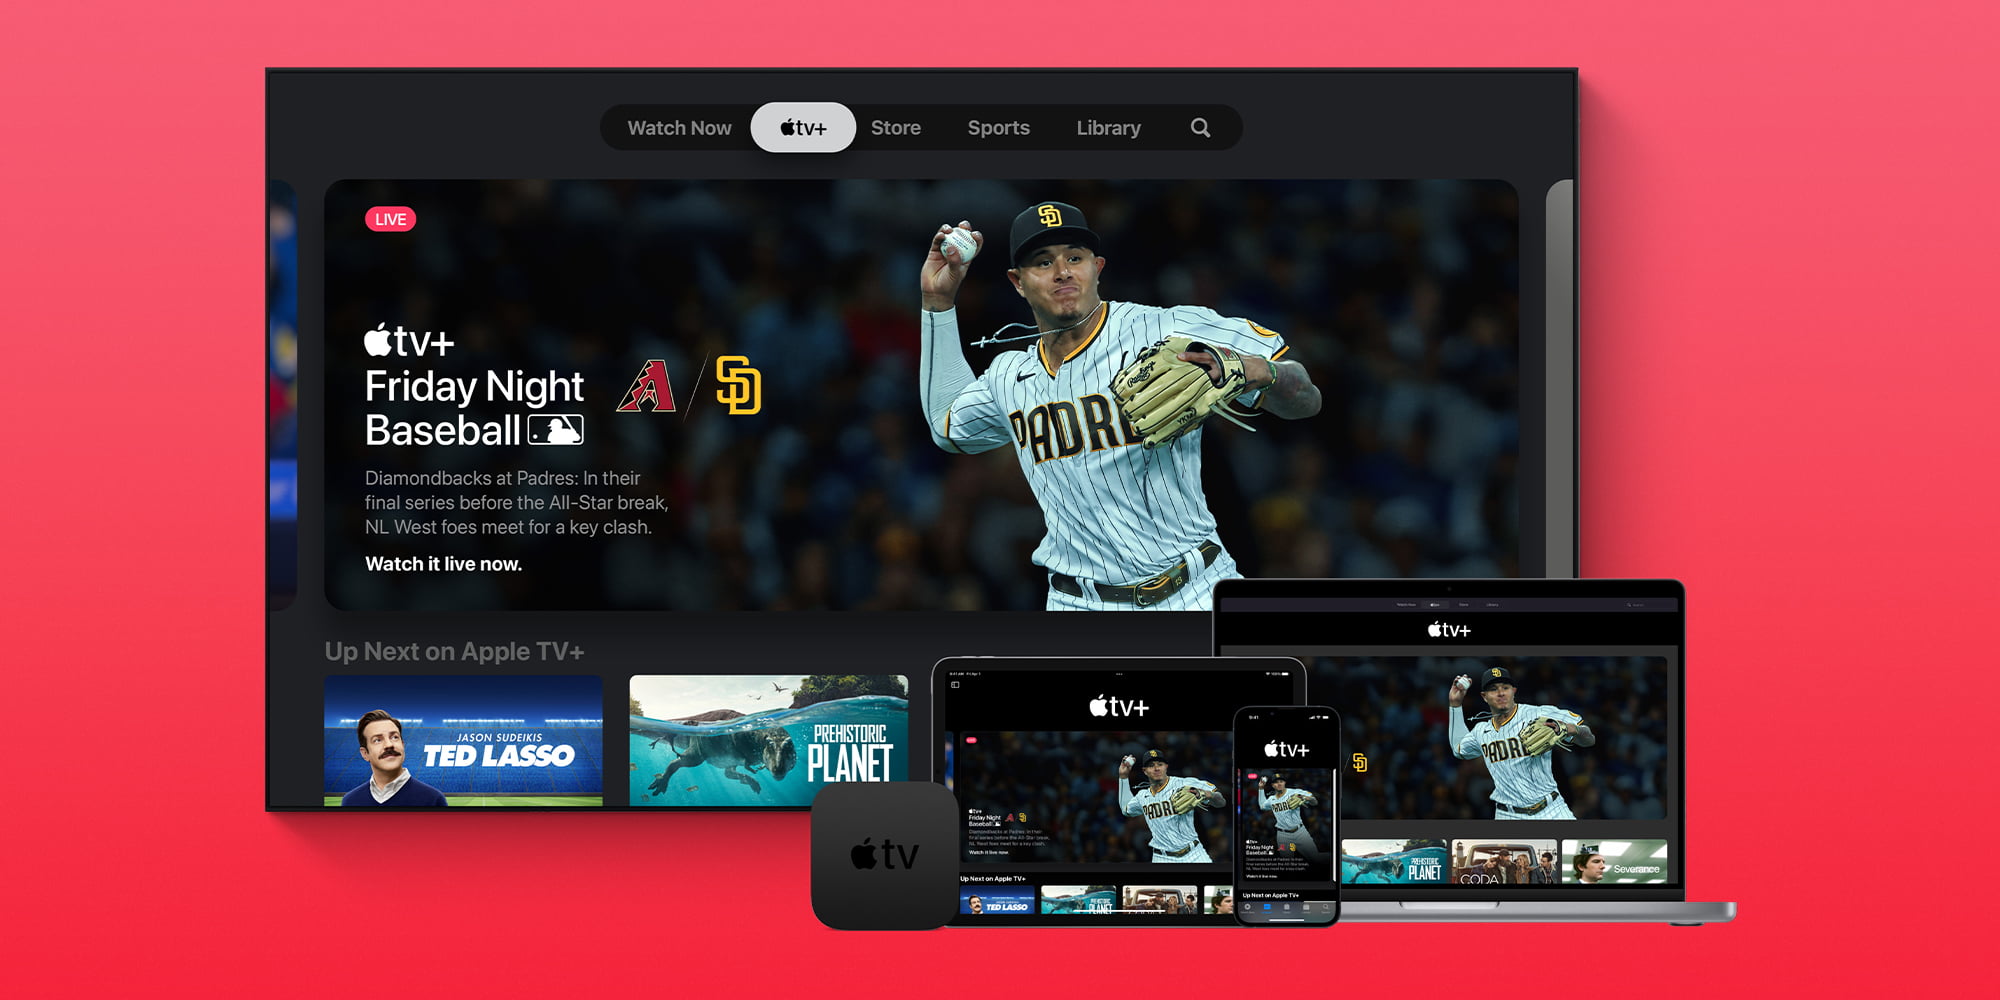 Apple TV+ Friday Night Baseball August schedule live